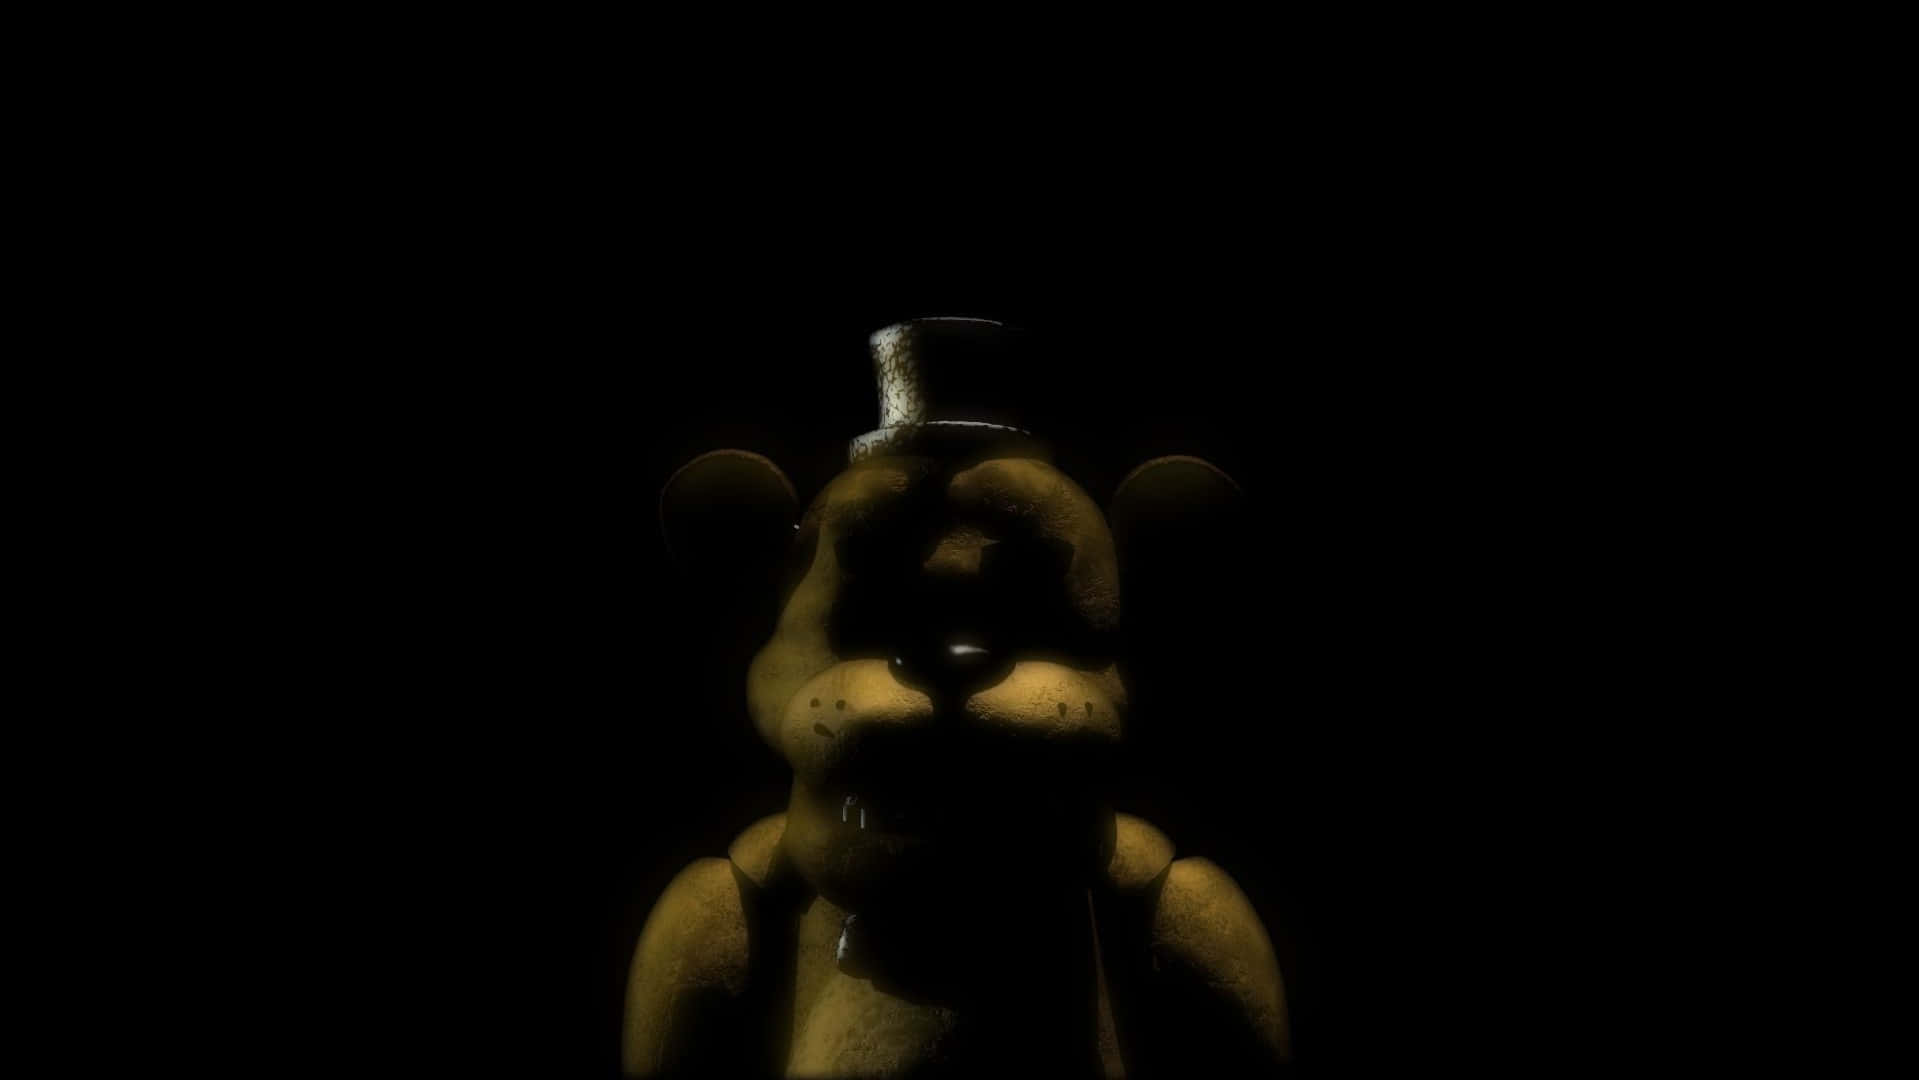 "Enter the world of FNAF and be ready to face the nightmares"